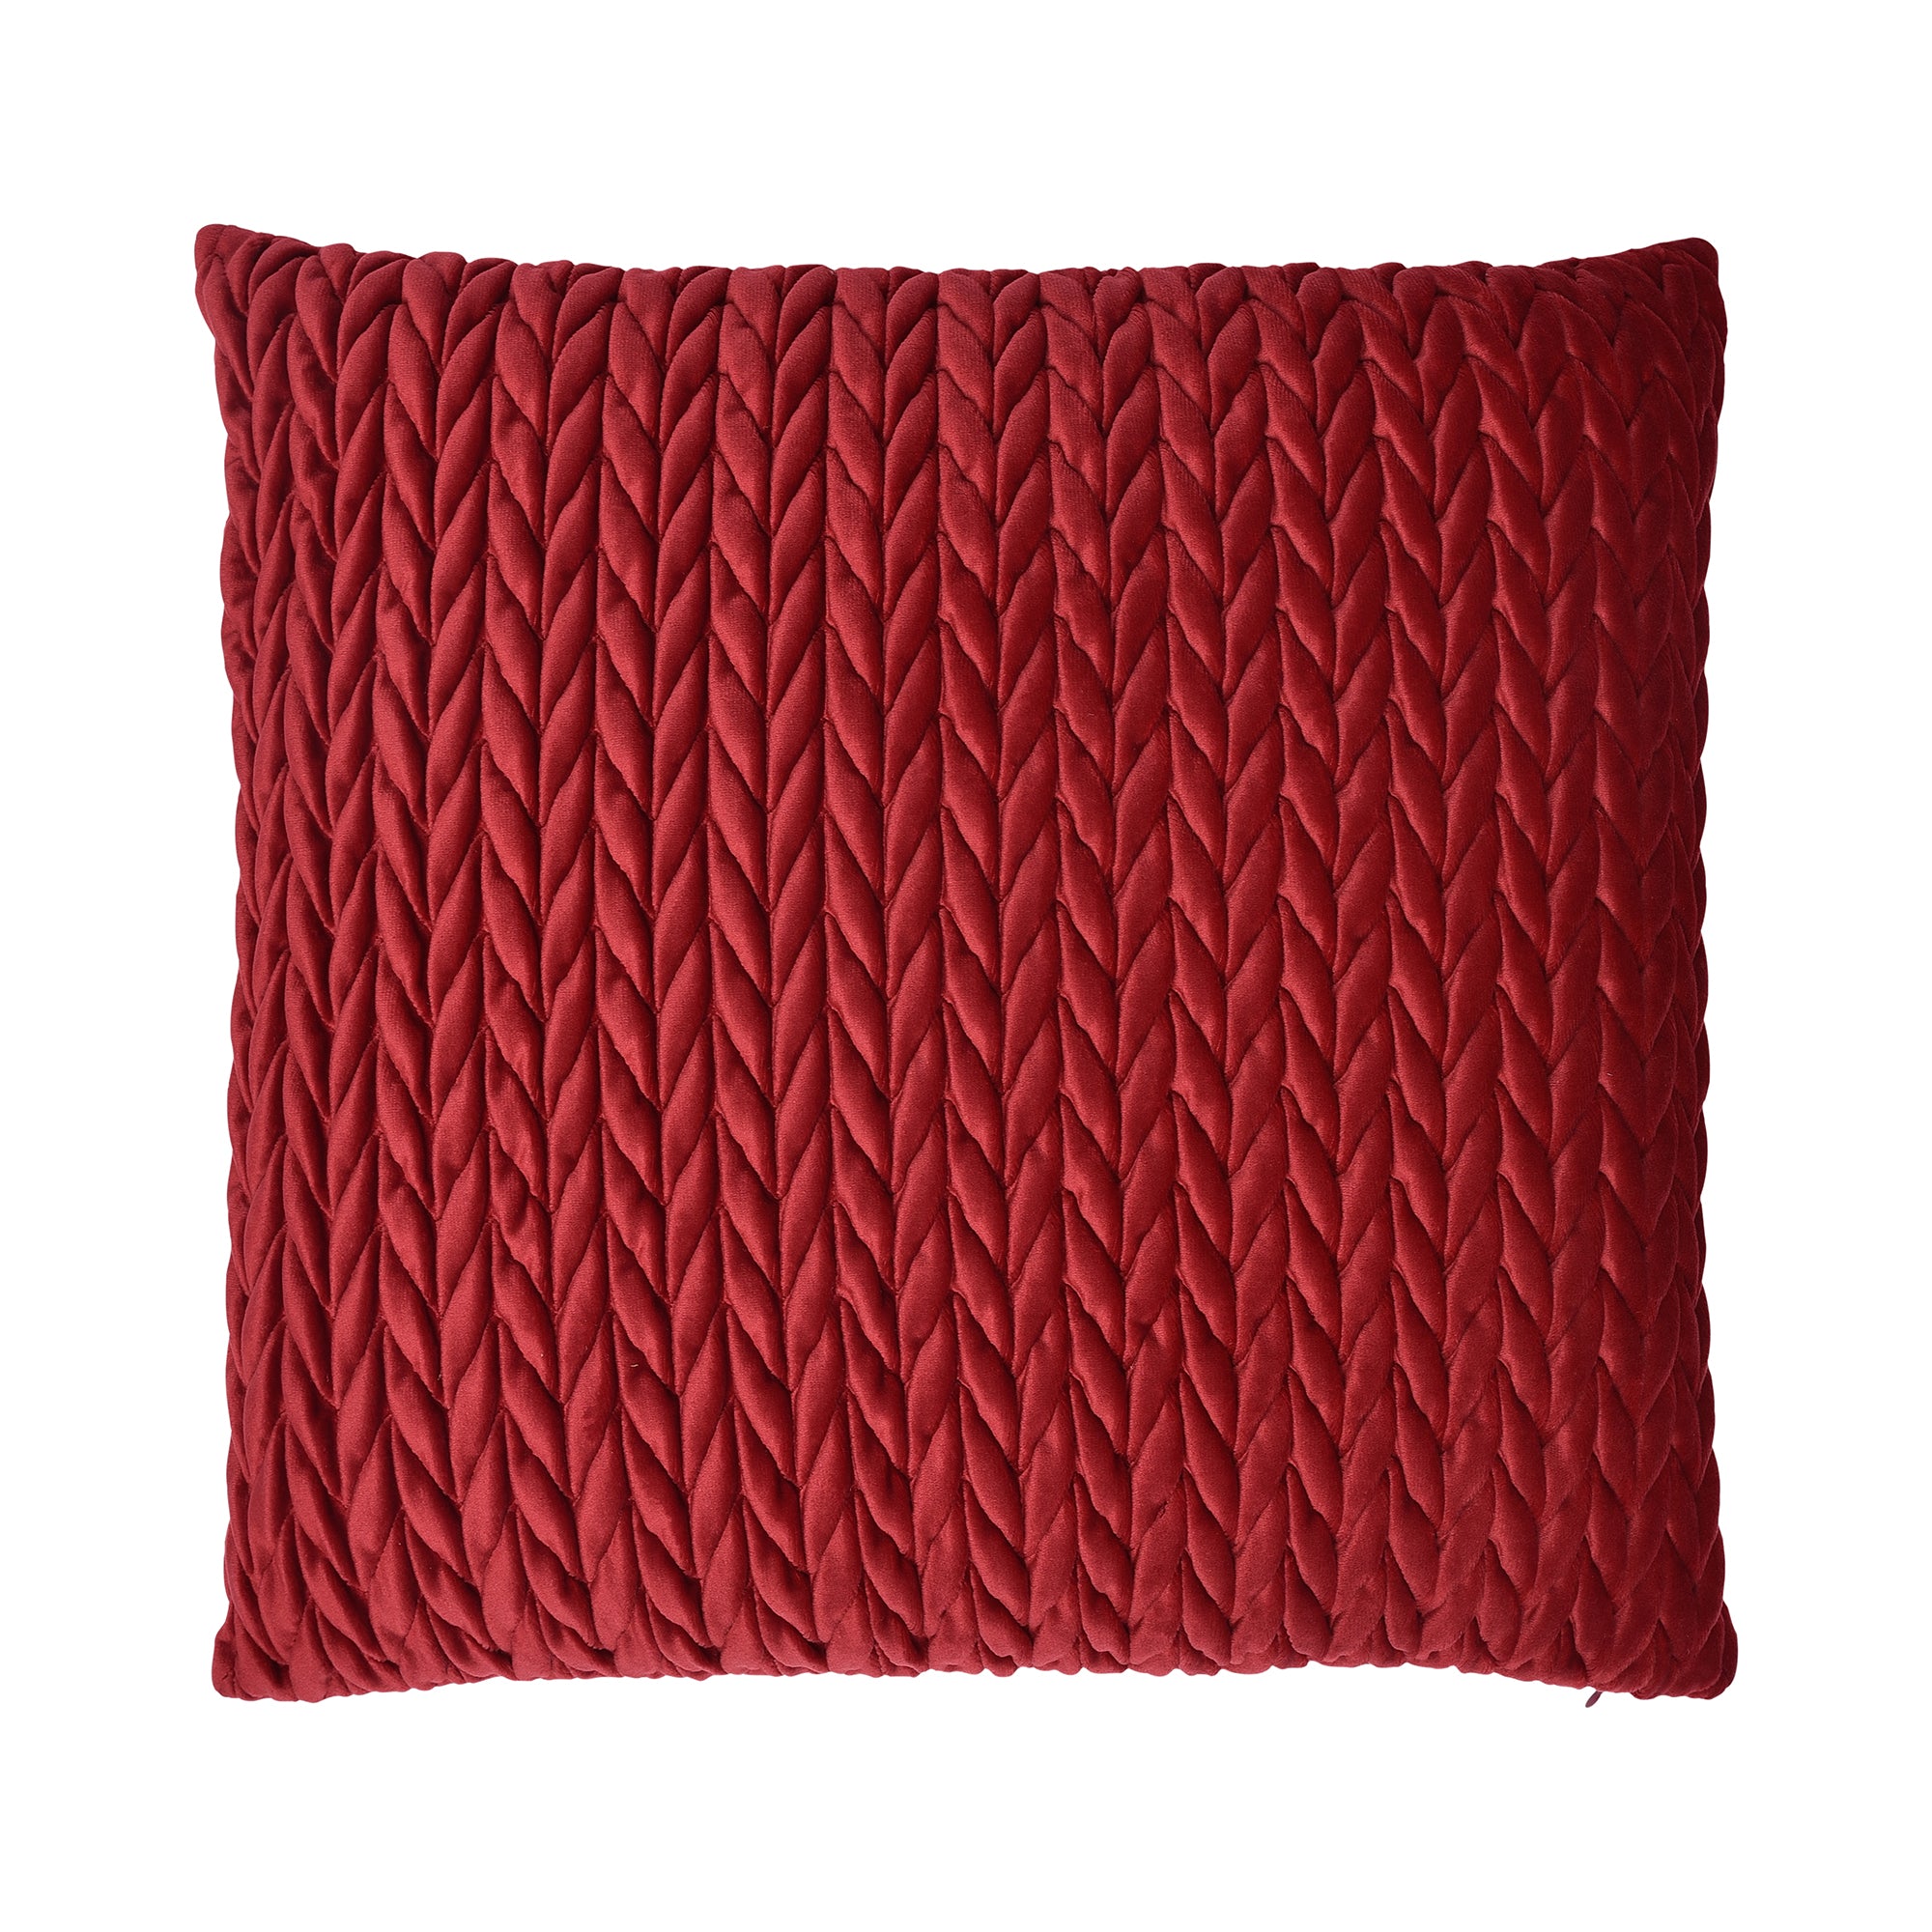 Amory Cushion by Laurence Llewelyn-Bowen in Claret 43 x 43cm - Cushion - Laurence Llewelyn-Bowen